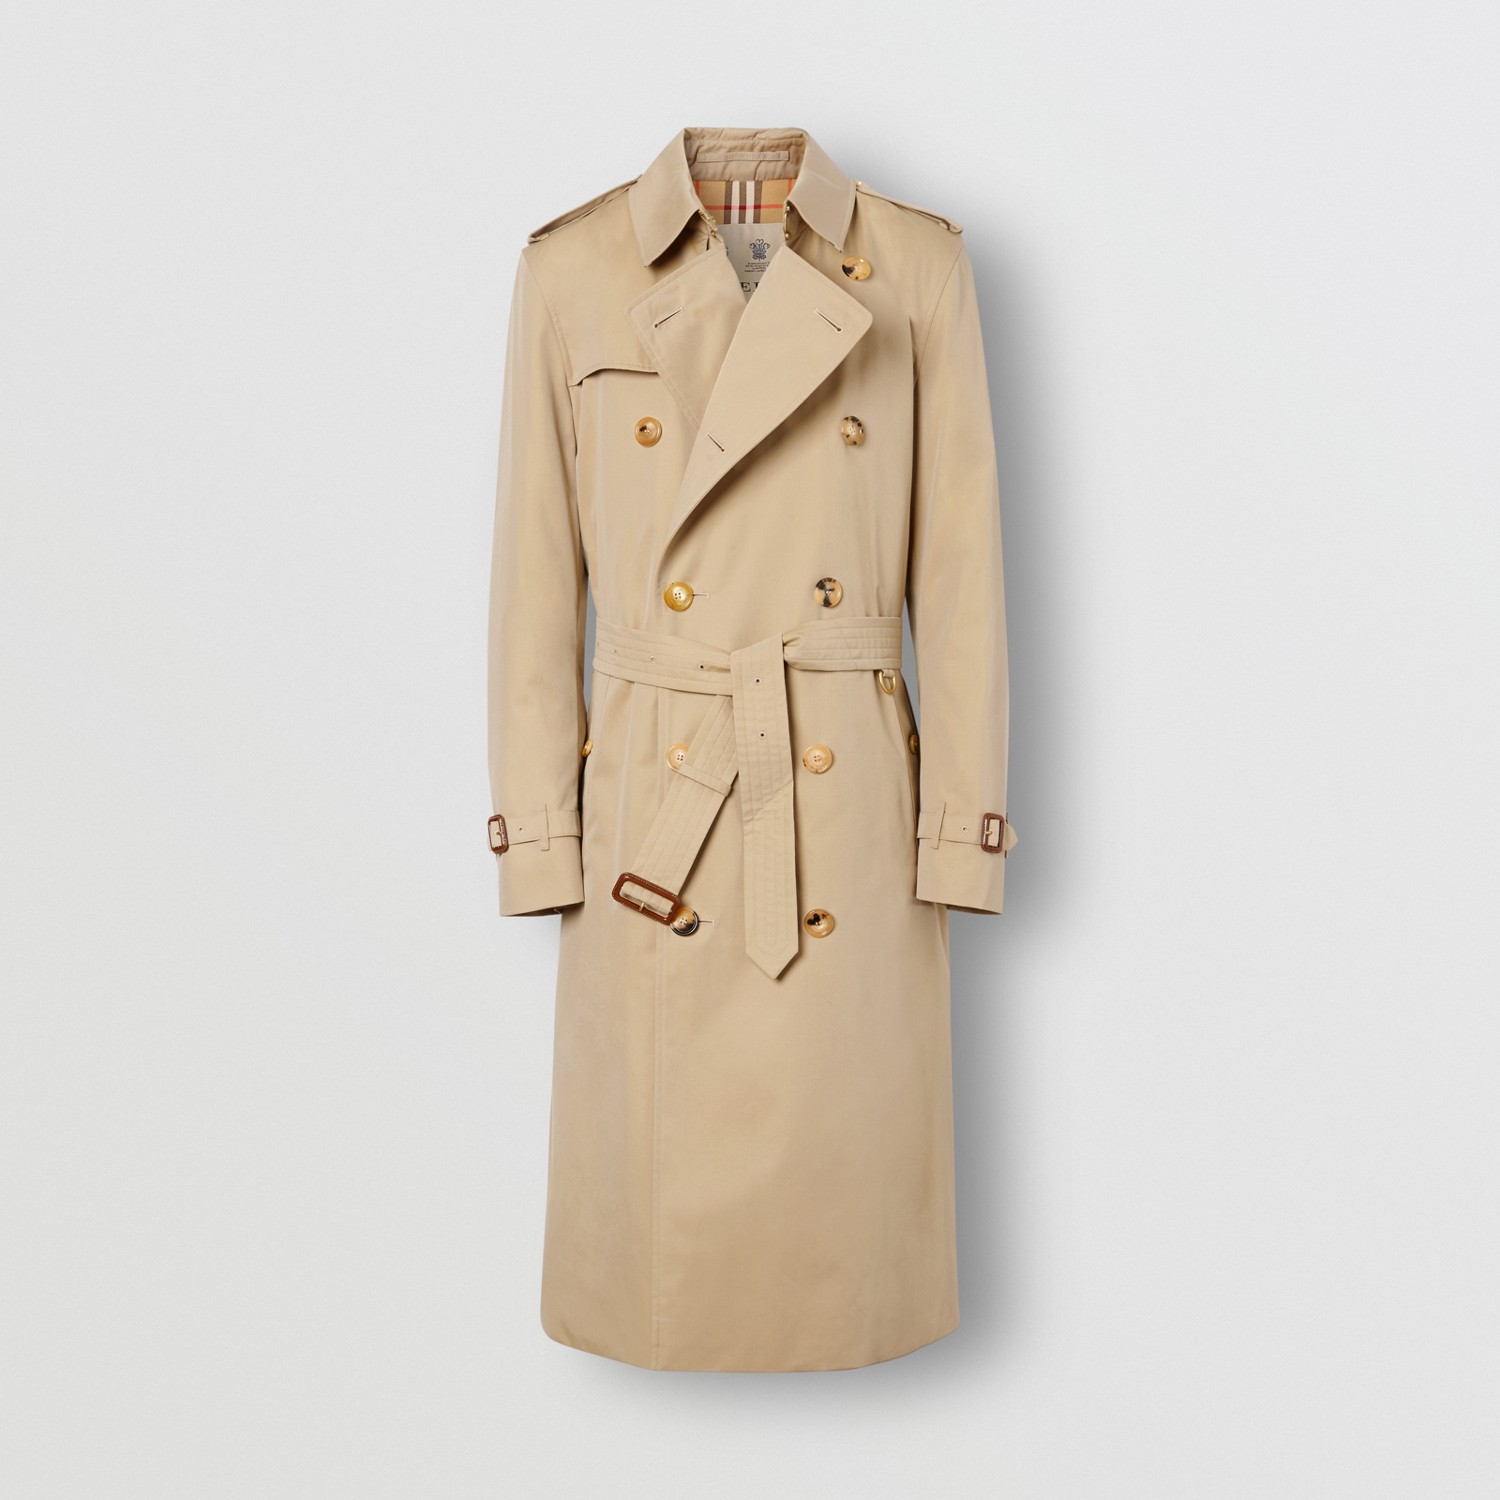 An Honest Review of the Burberry Trench Coat